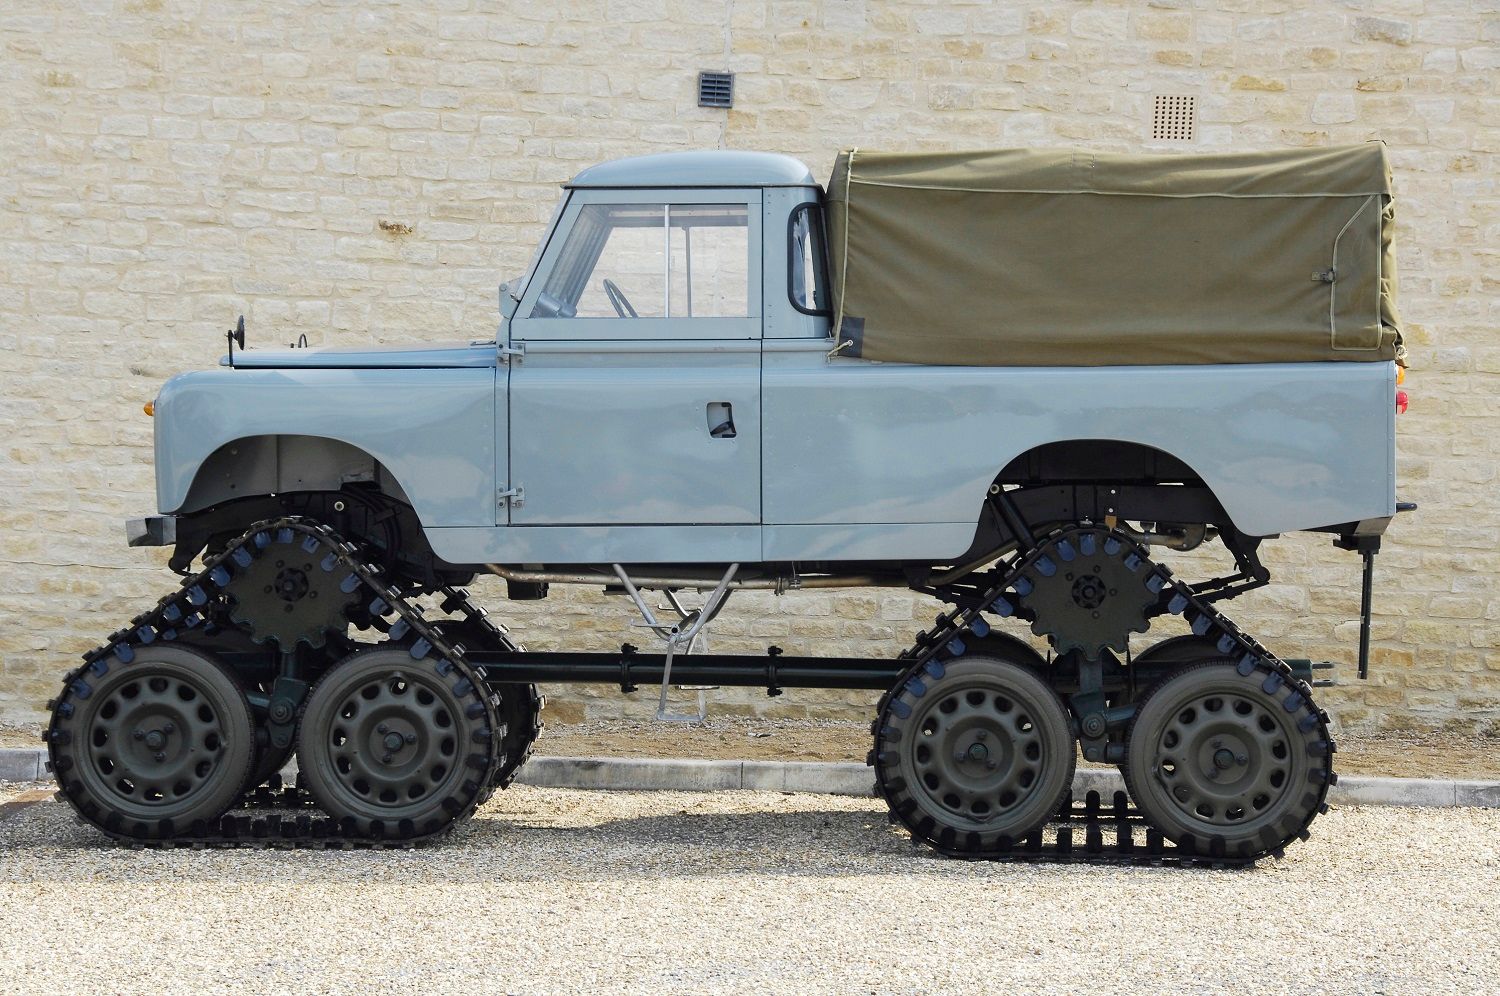 Cuthbertson Tracked Land Rover.